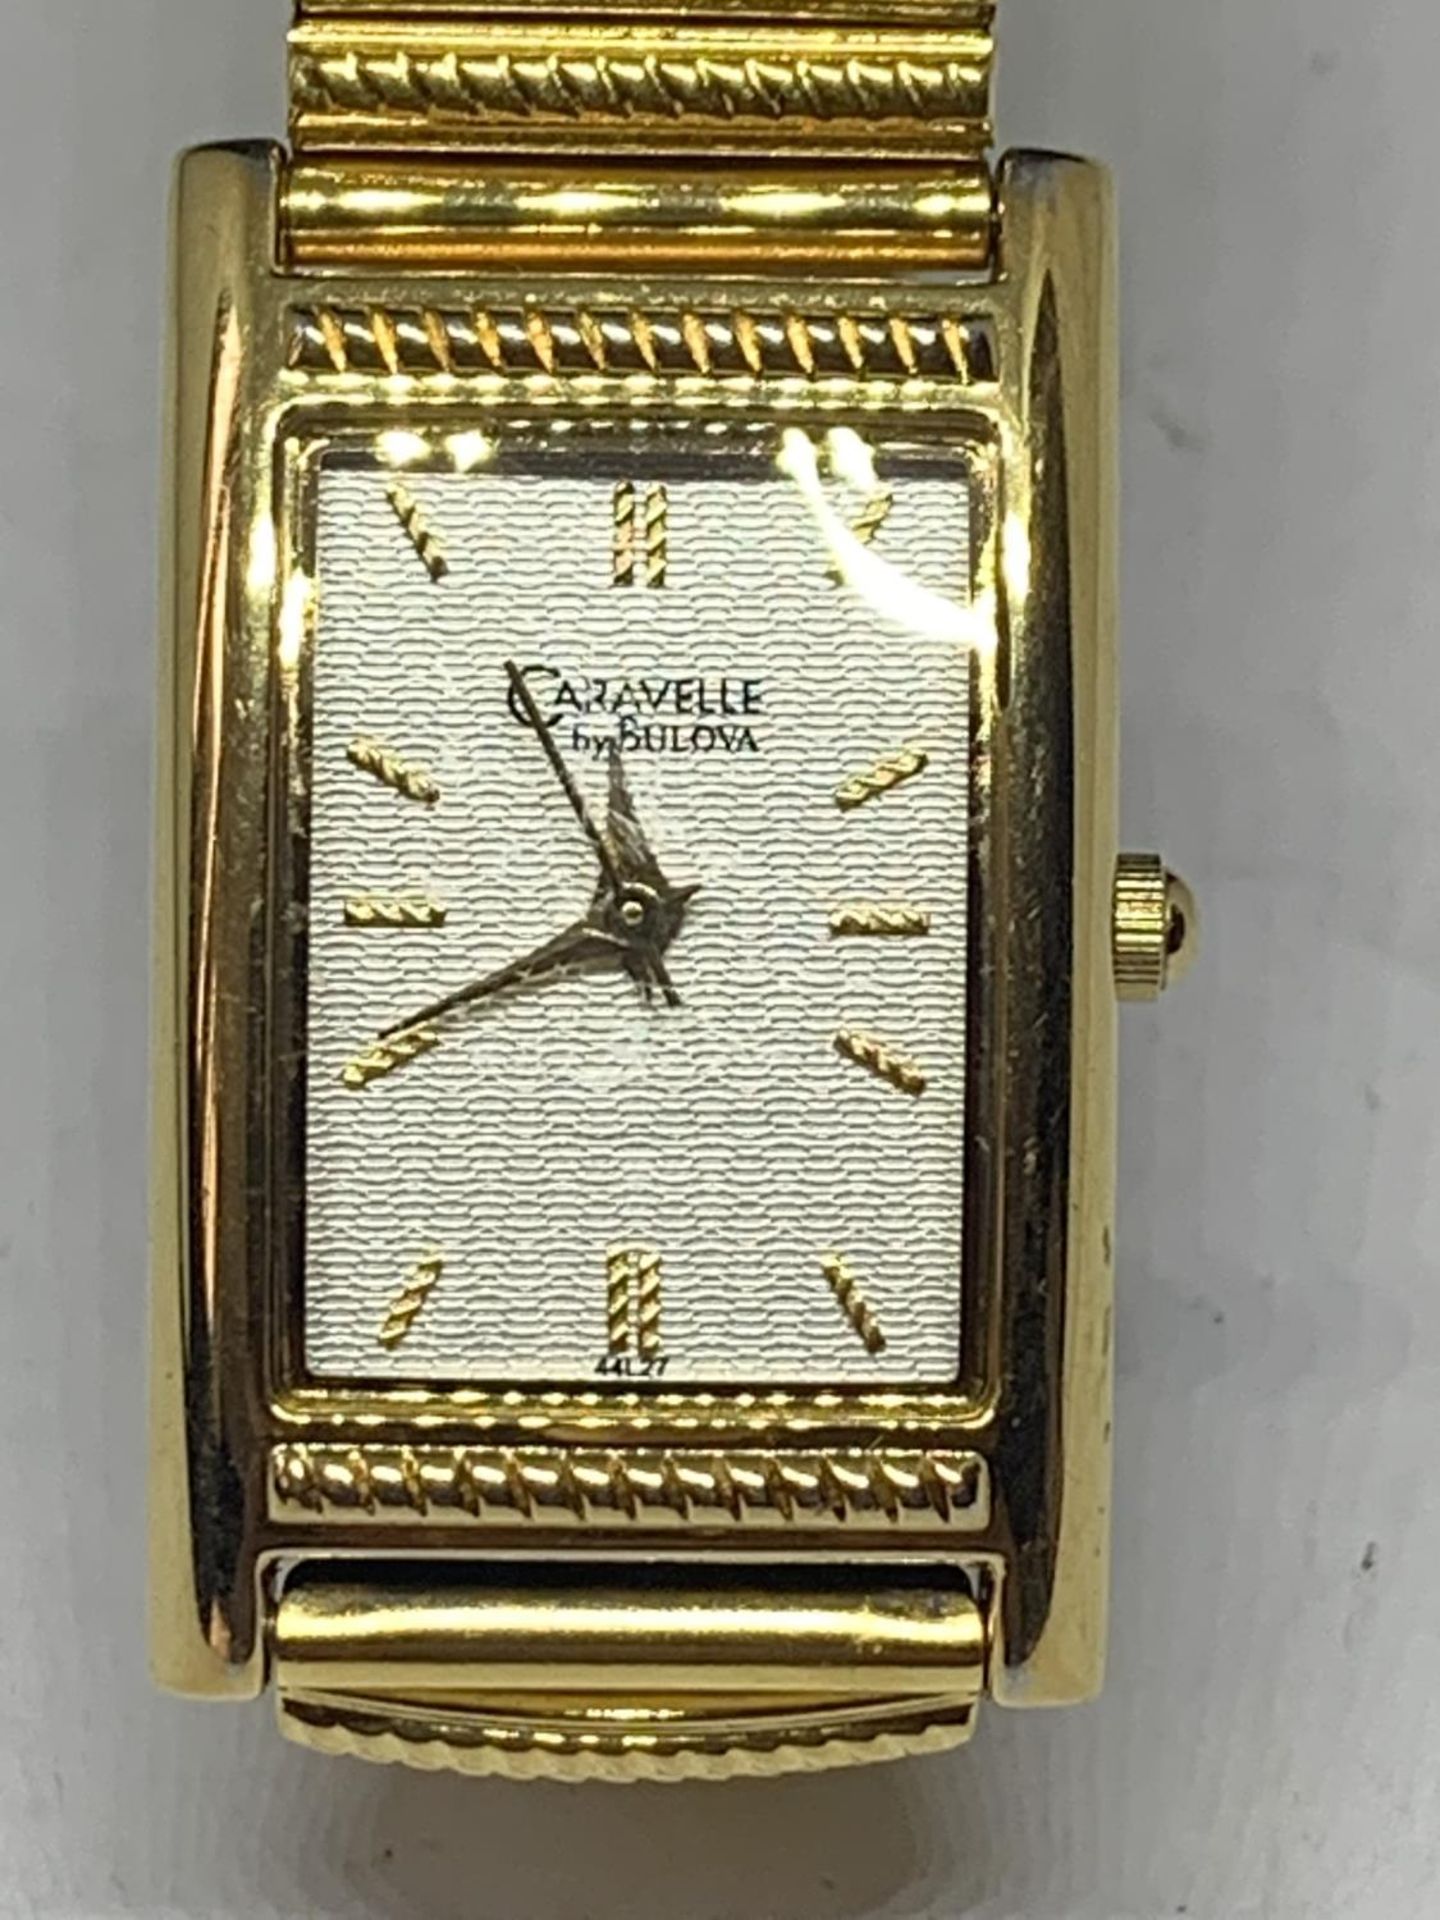 A GOLD PLATED CARAVELLE WRIST WATCH SEEN WORKING BUT NO WARRANTY - Image 2 of 3